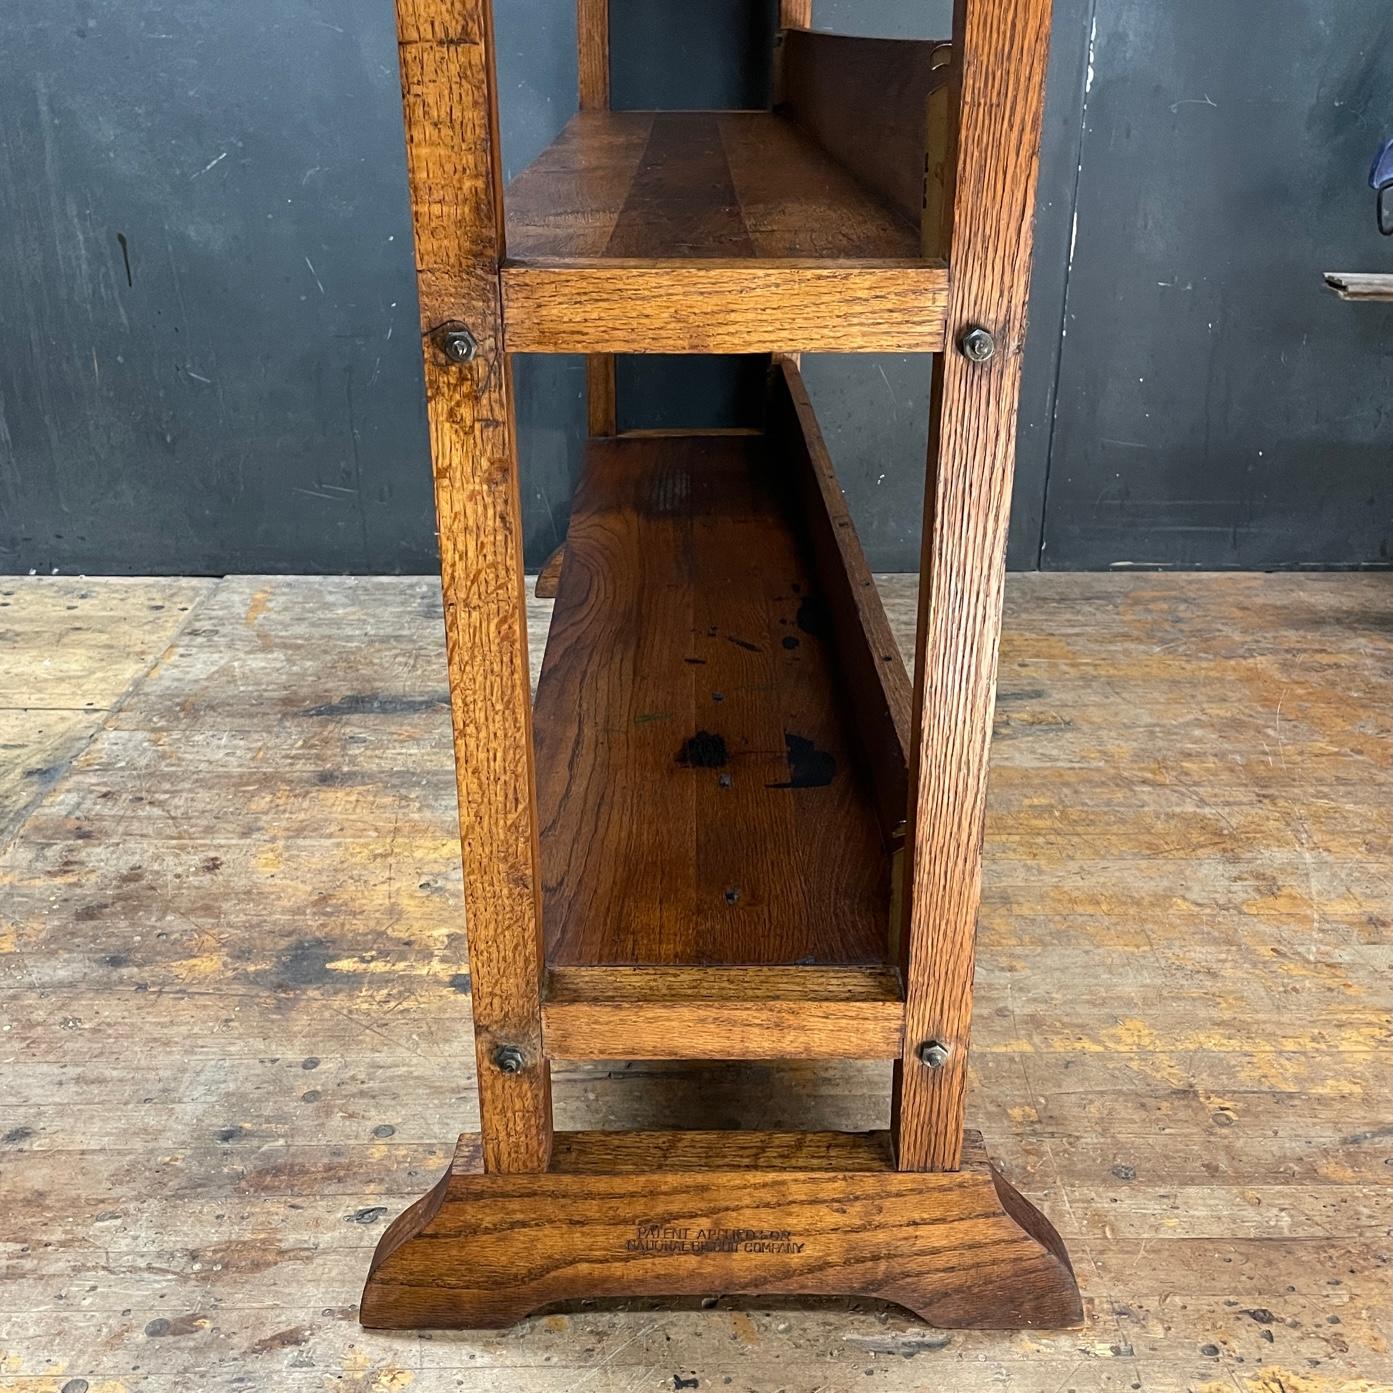 Early 20th Century Mission Bookcase Shelf Bespoke General Store Industrial NYC Retail Display Shelf For Sale